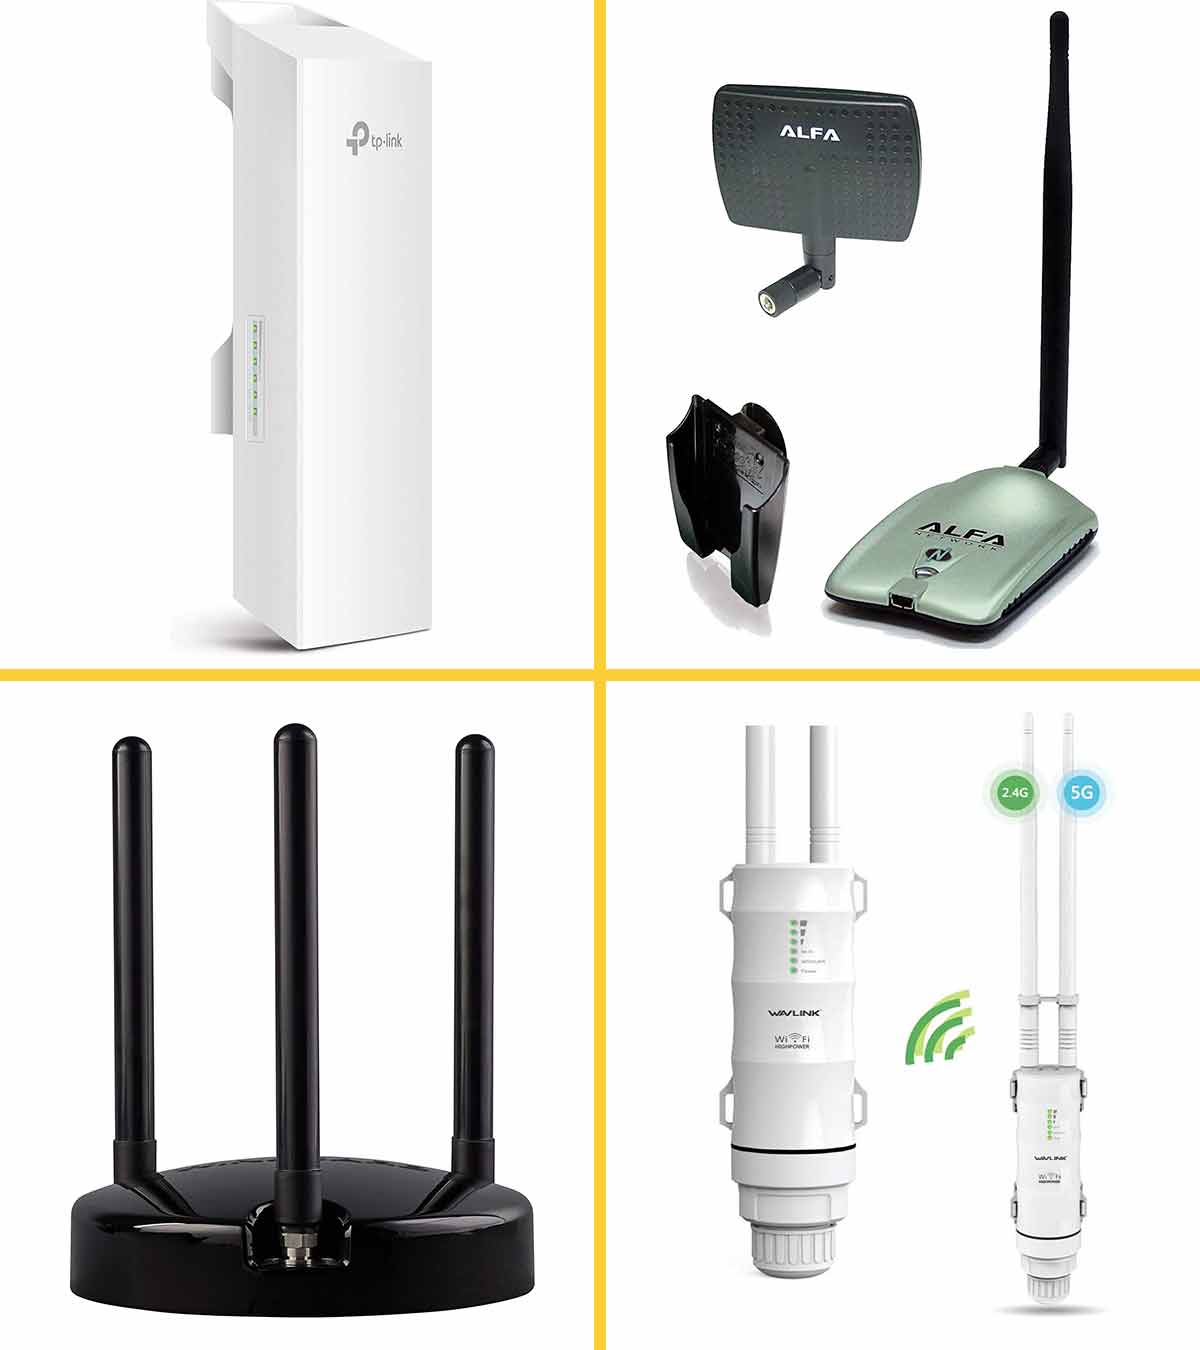 Are Wifi Extenders Worth it? 